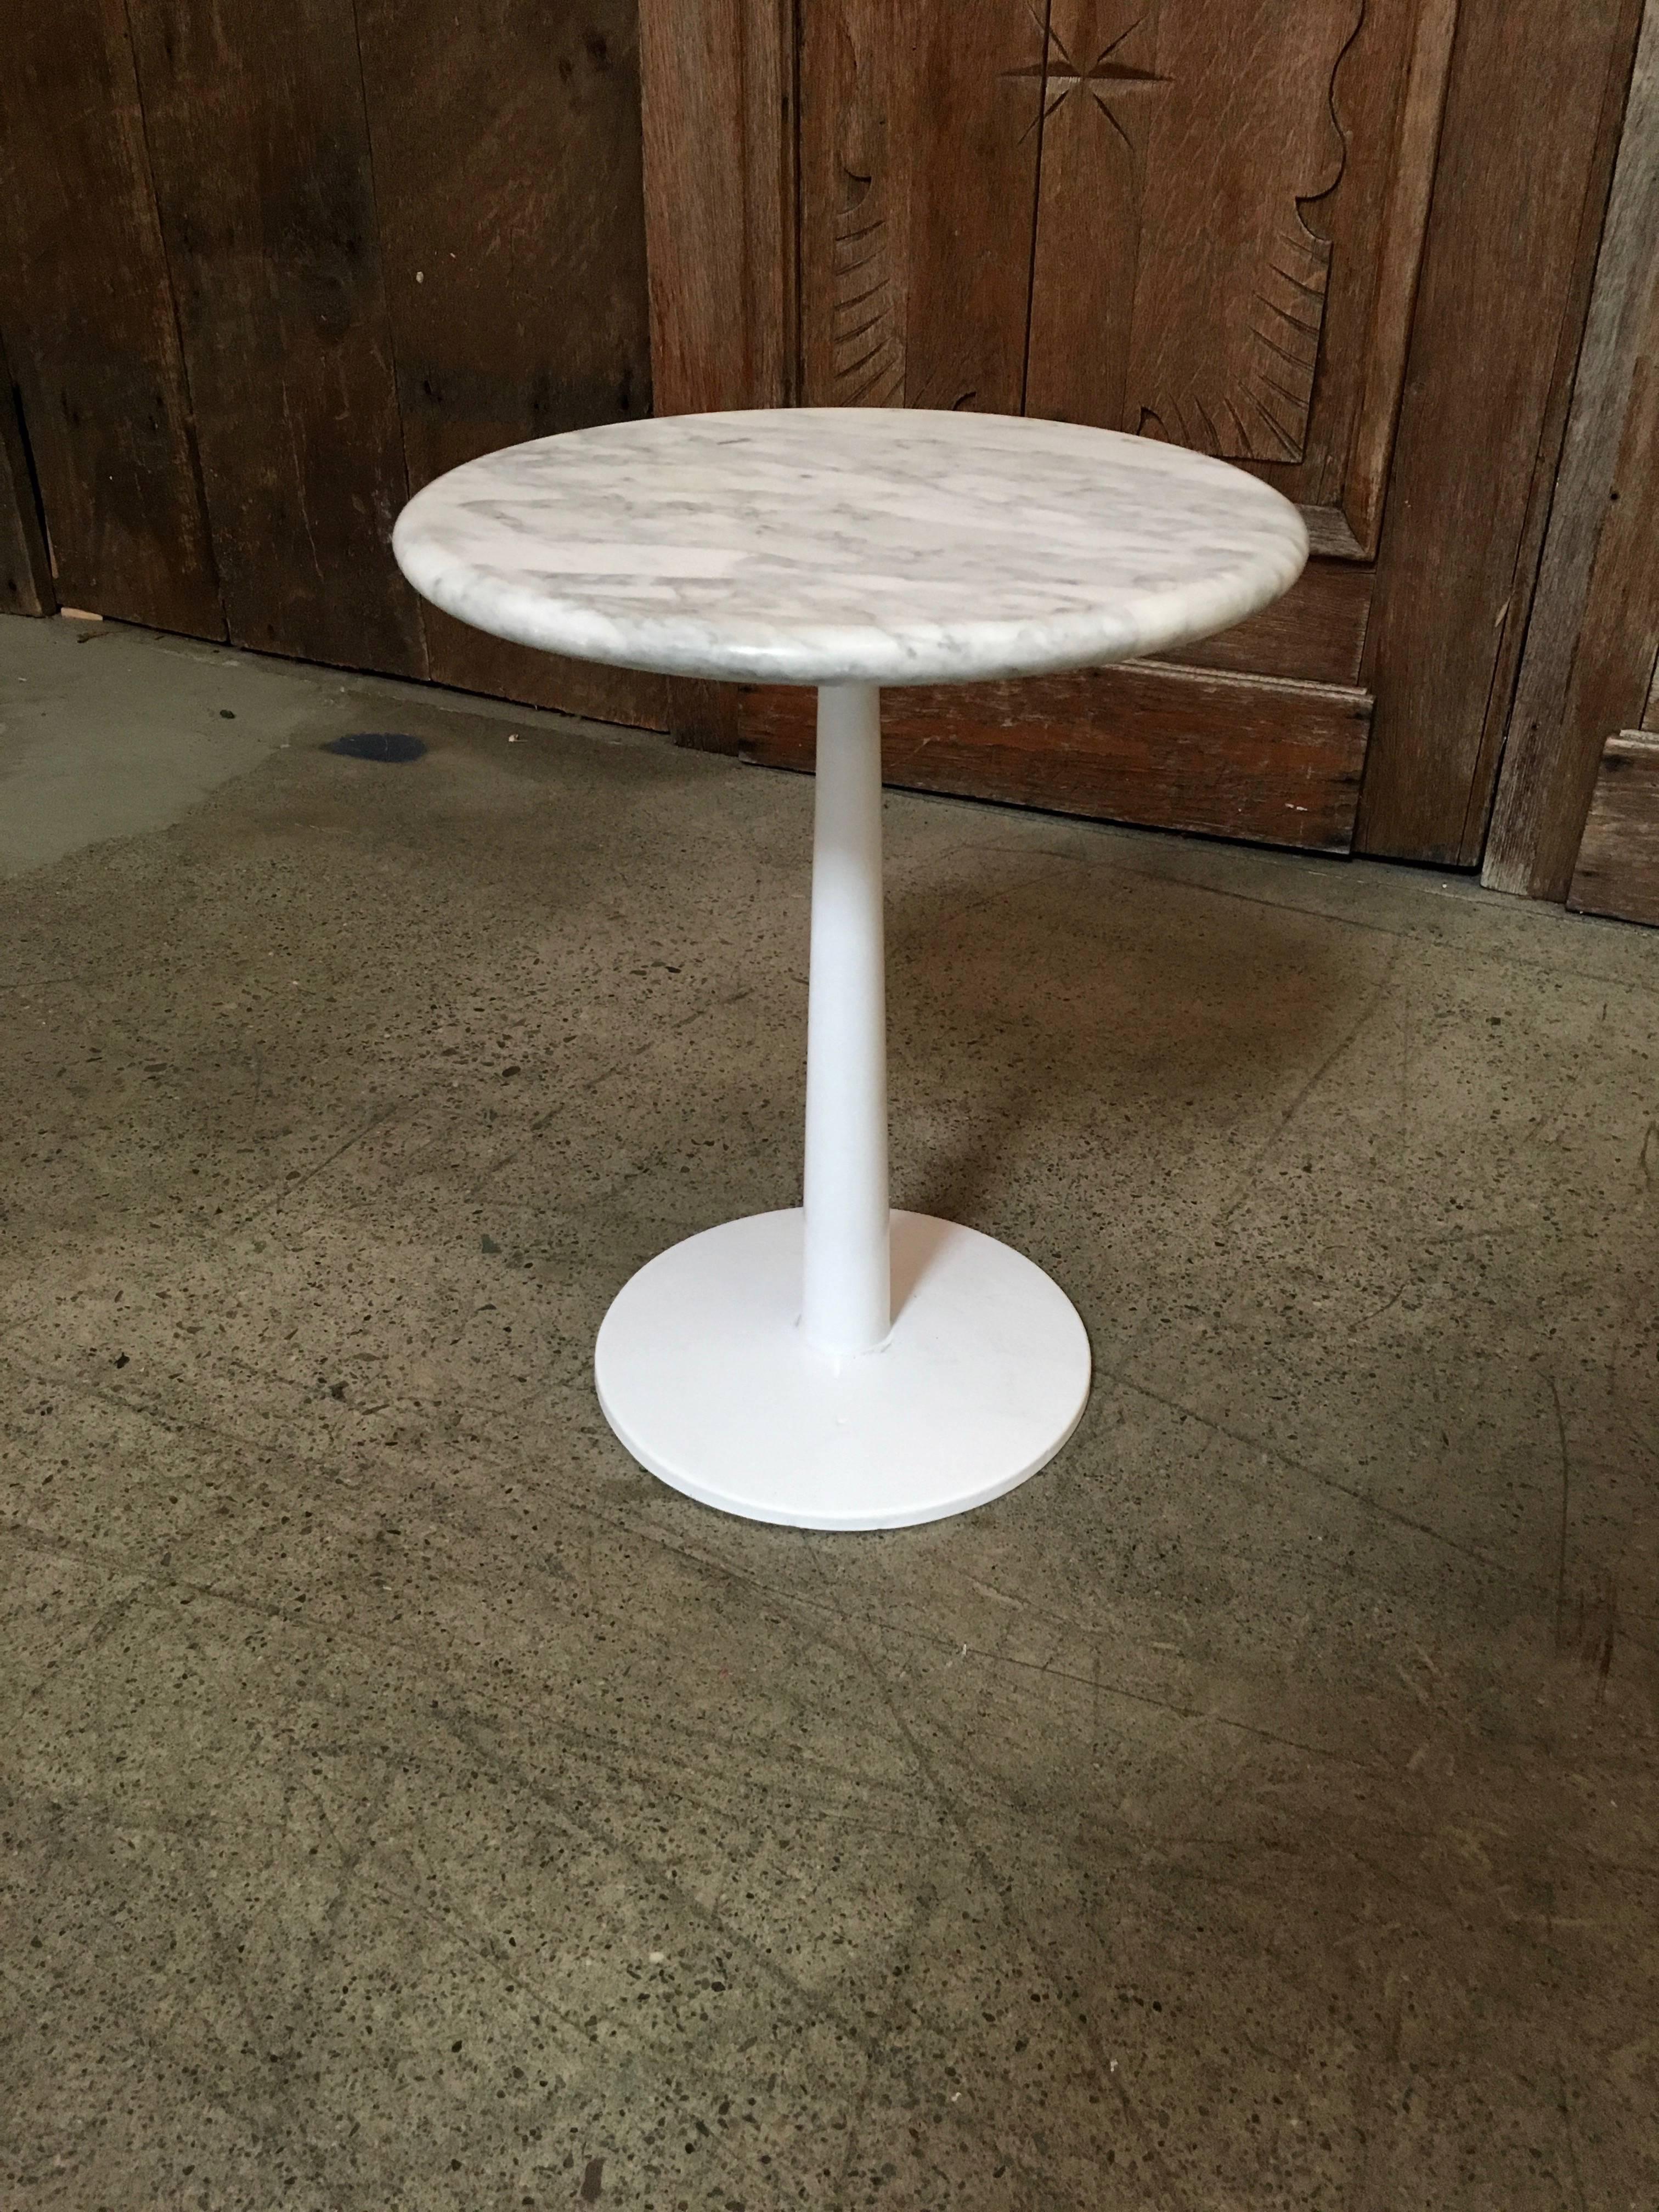 Model ST - 8 with Carrara marble-top and steel base. Designed by Erwine and Estelle Laverne, circa 1960. Painted metal base with Carrara marble top.